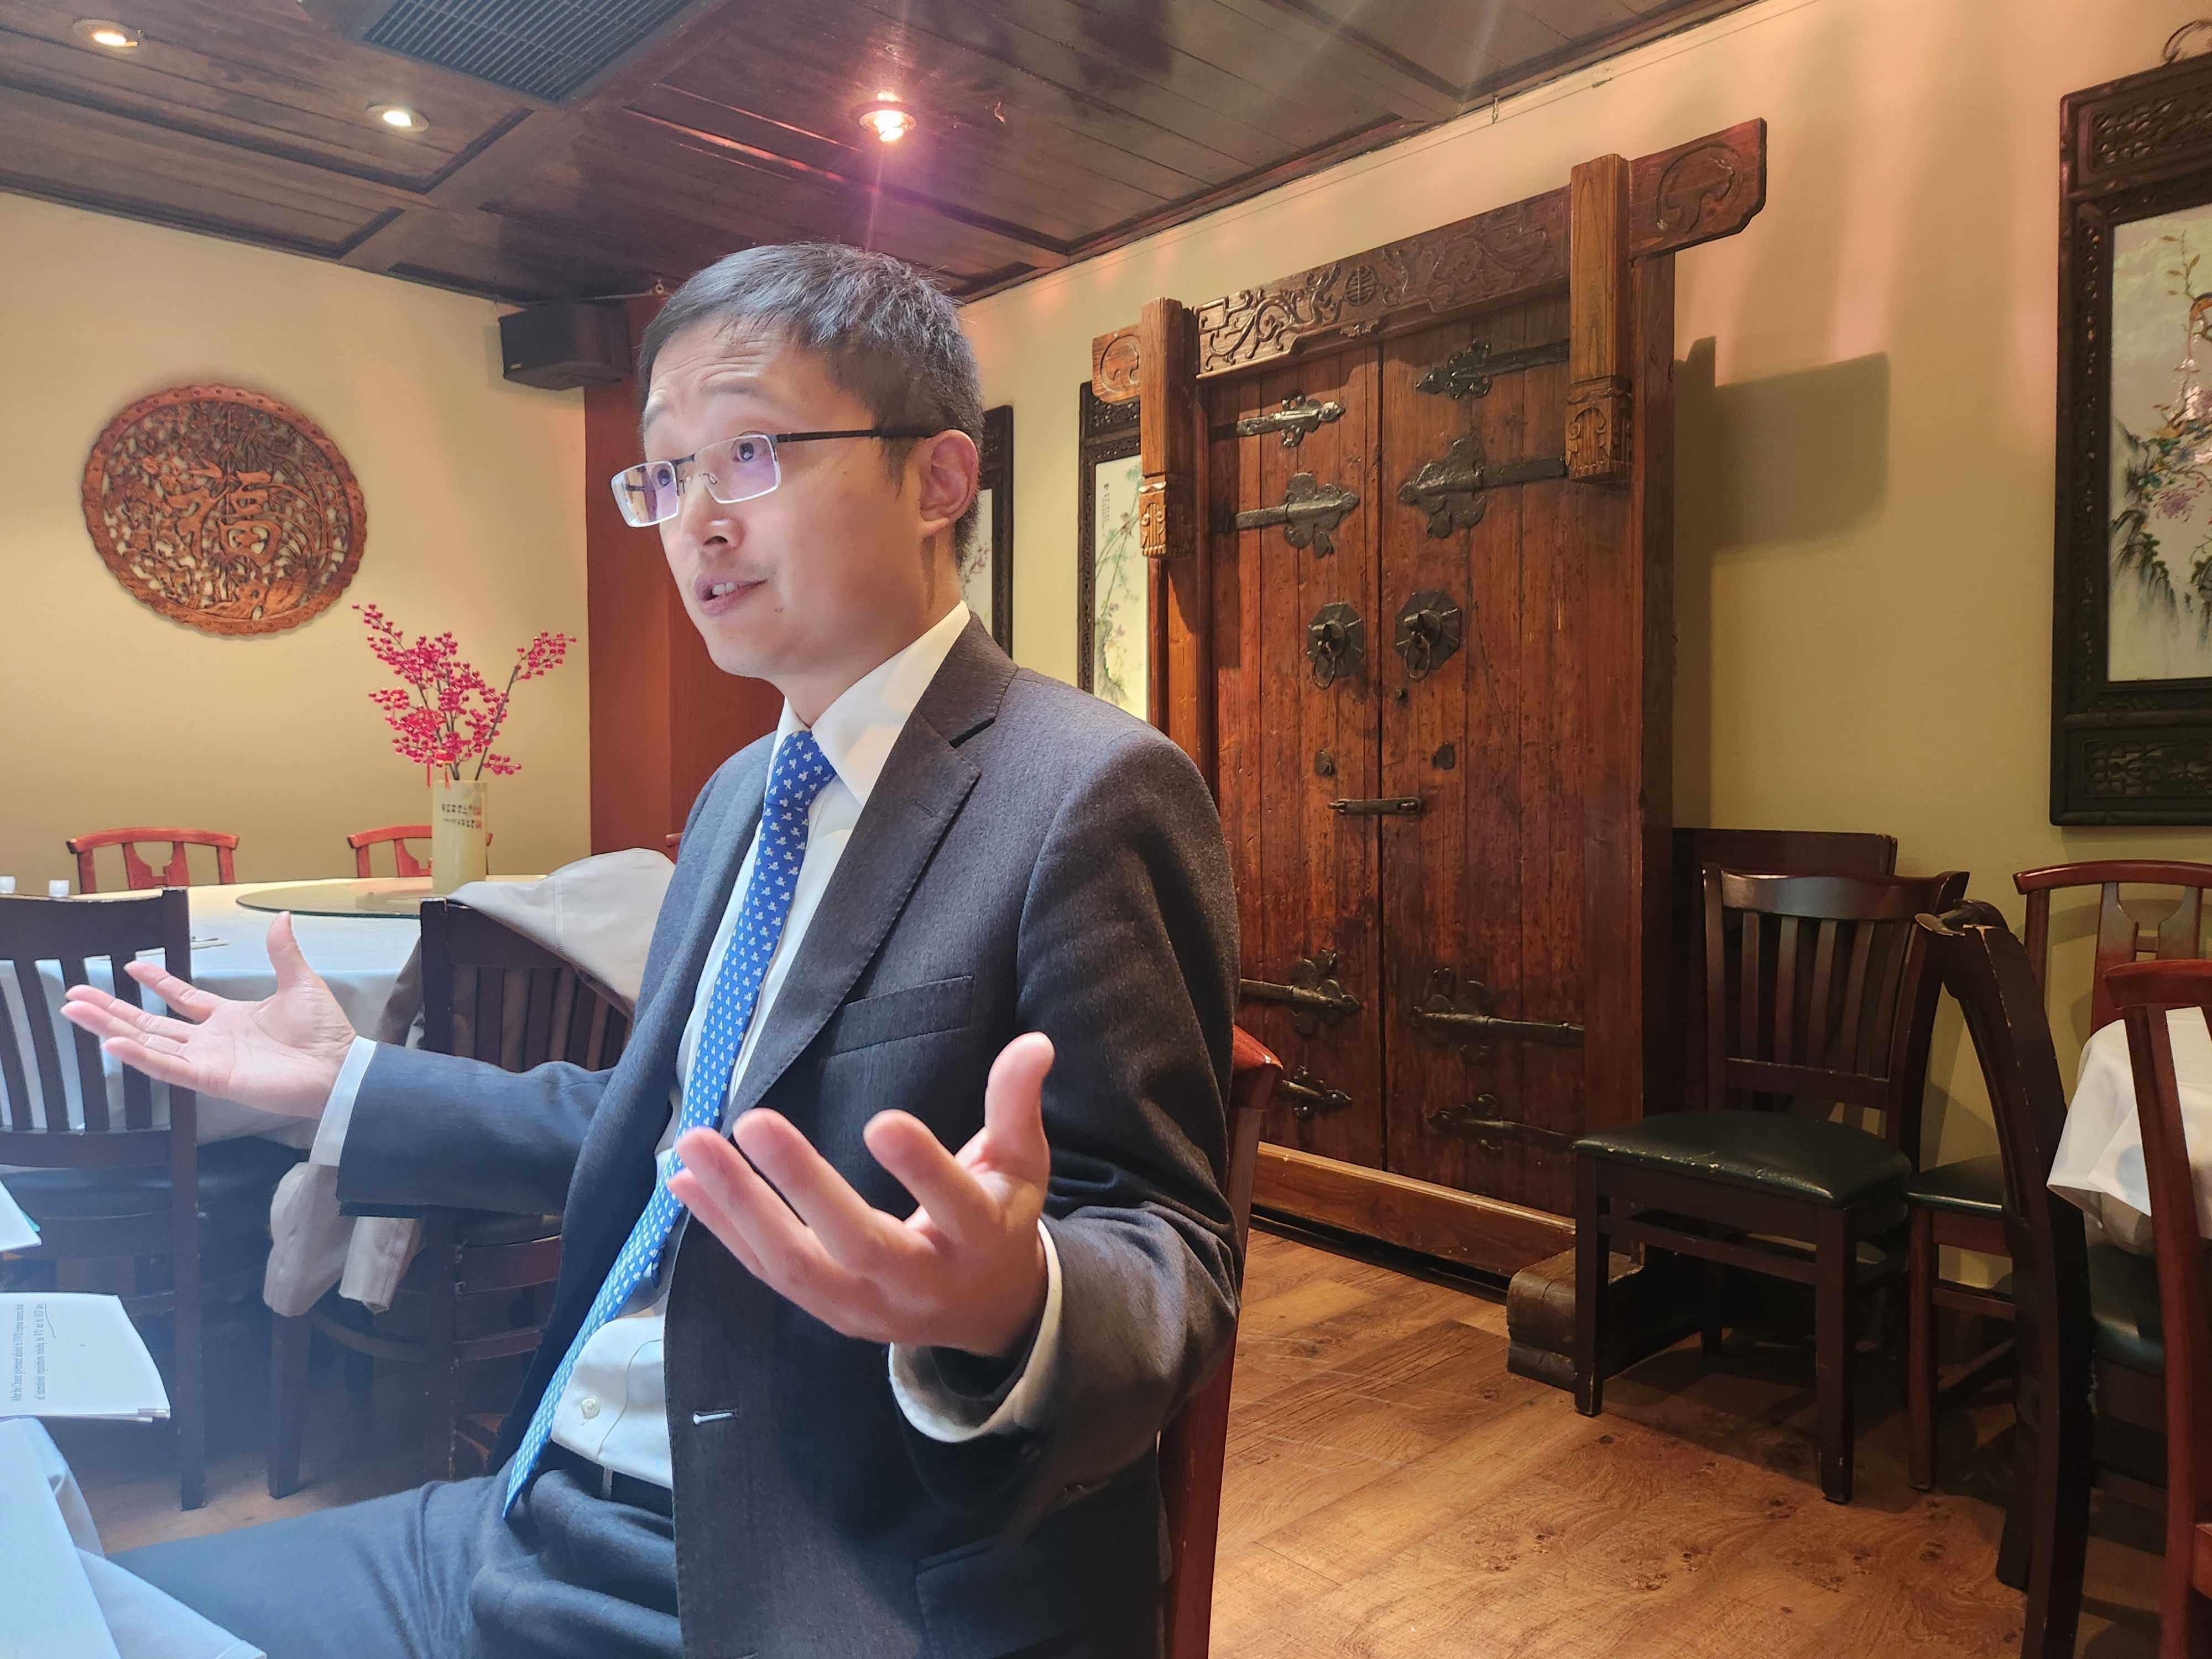 Qian Jin, Beijing’s deputy consul general in New York, has described China’s economy as “moving steadily forward”. Photo: SCMP